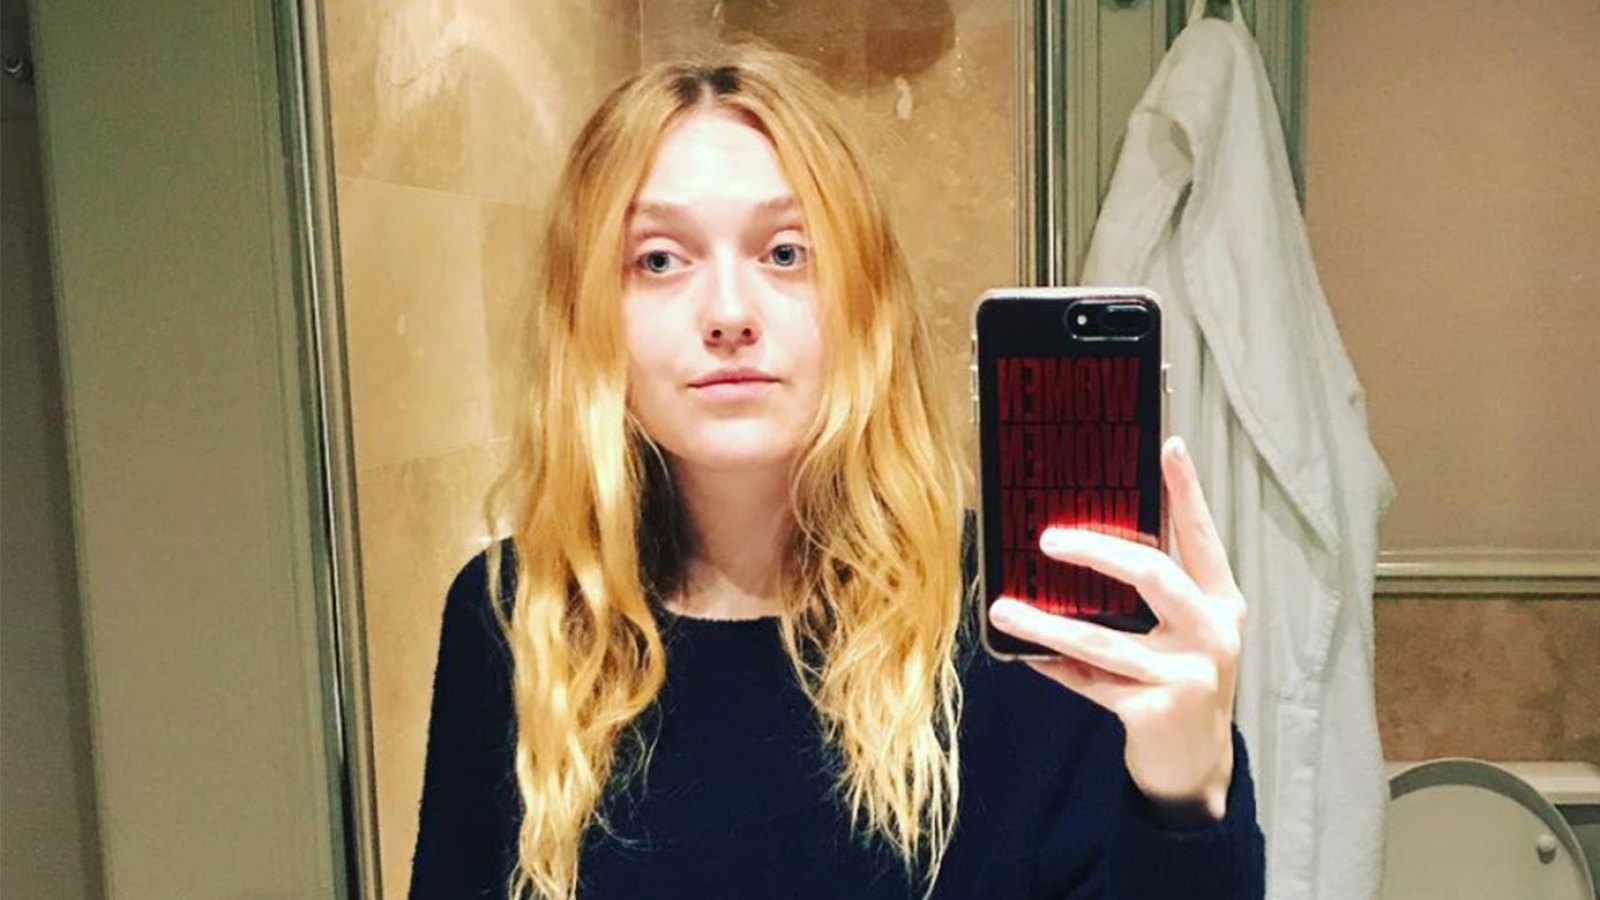 Dakota Fanning Wore Pants With Two Waistbands and We're Kind of Into It